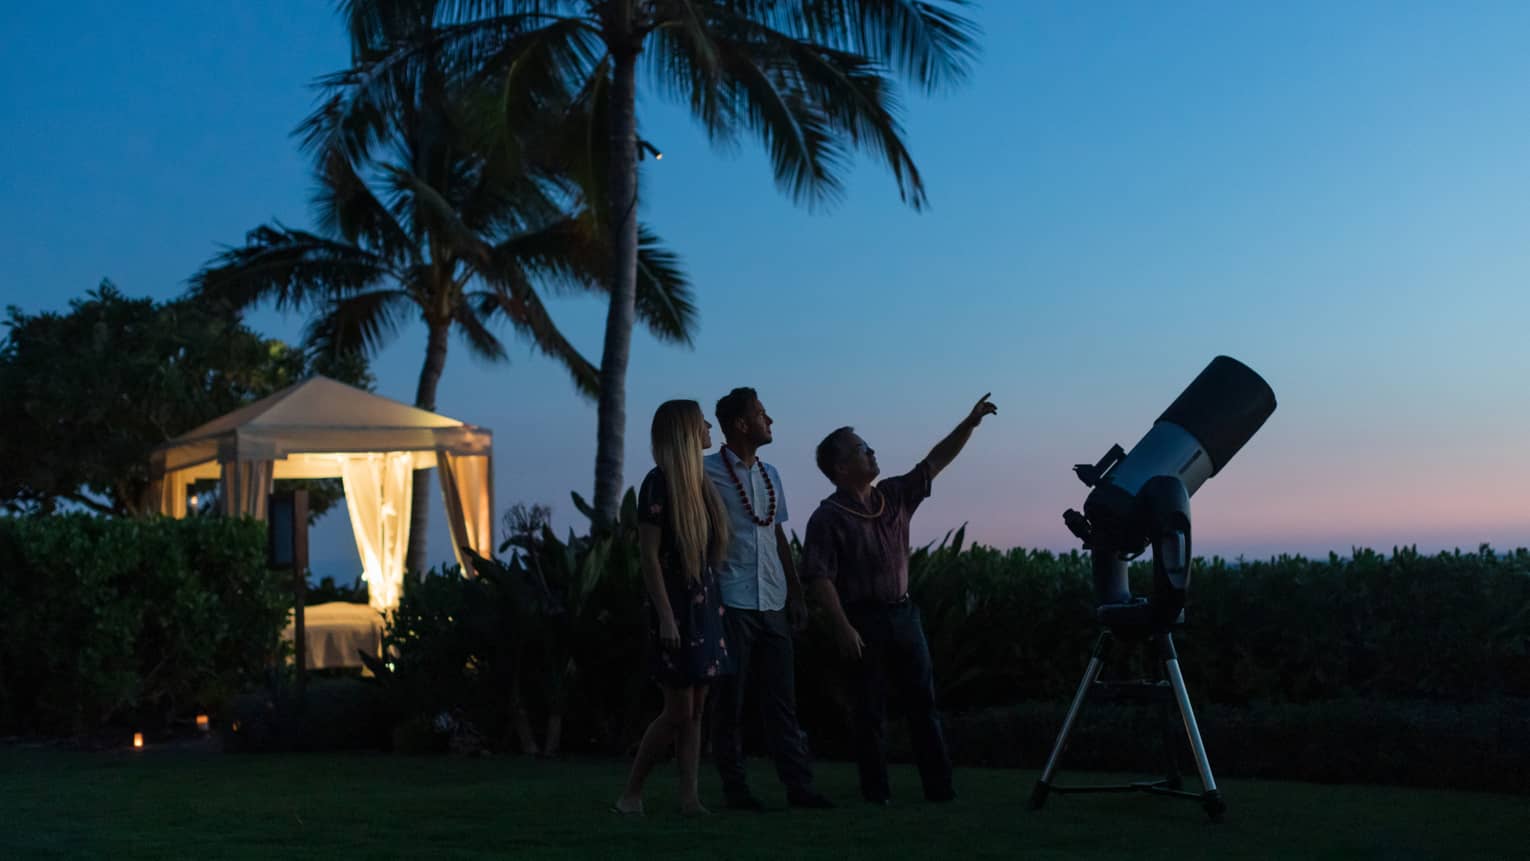 Silhouetted amid palm trees and a telescope, a guide points at the sky as two guests look up, a lit-up gazebo behind them.